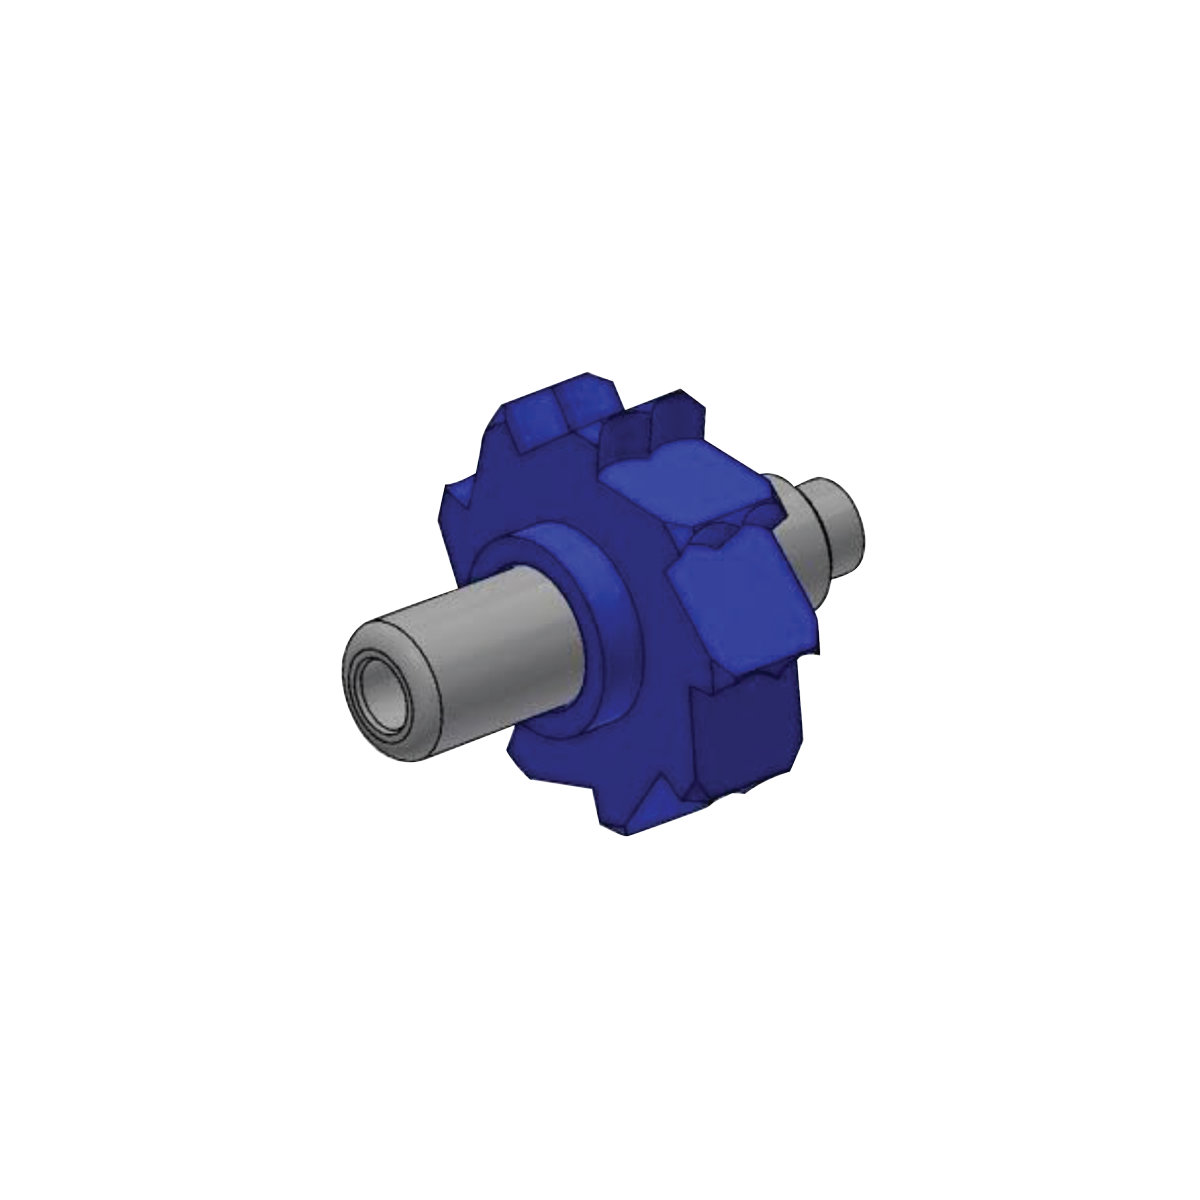 Star 430 Torque PB Spindle With Impeller